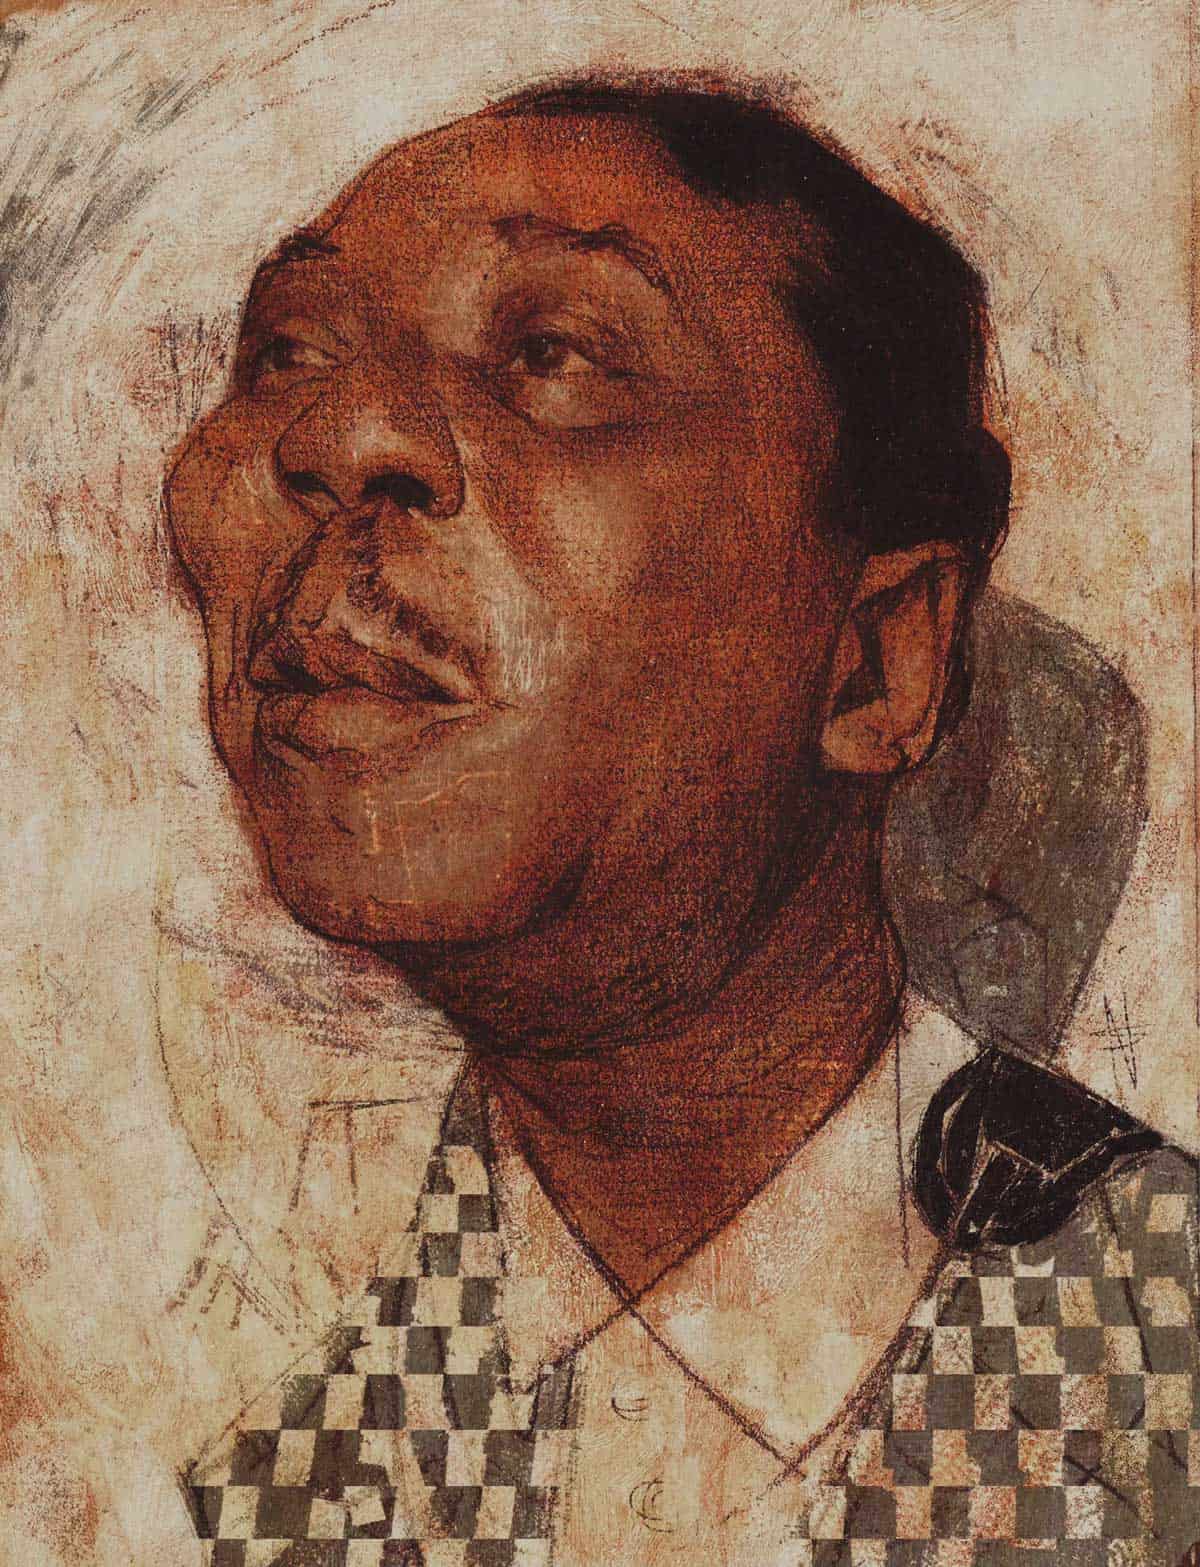 Tradigital illustration painting of Muddy Waters by Nate Sweitzer